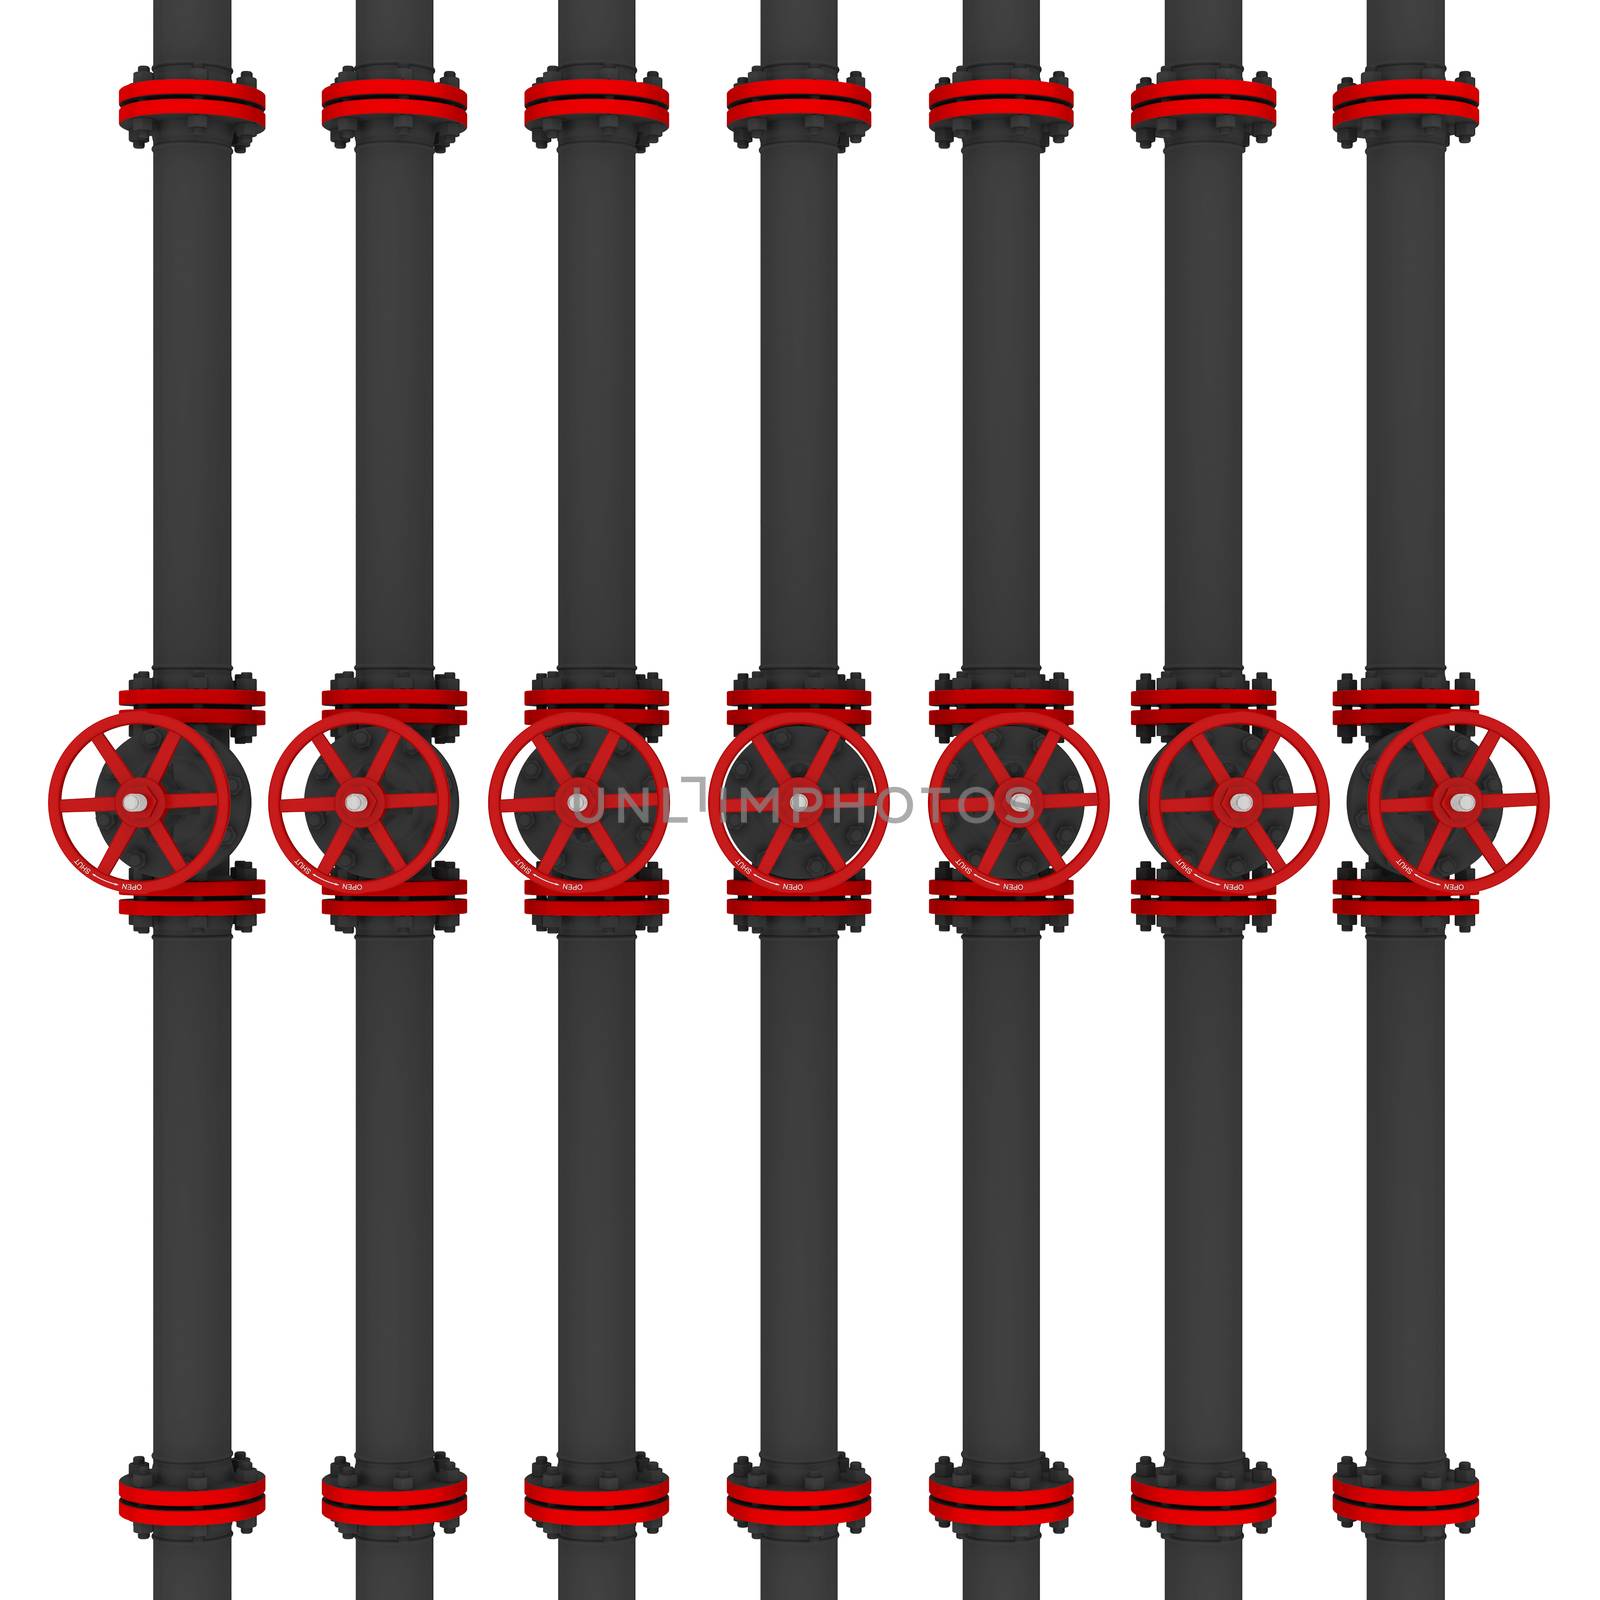 Black pipes and valves. Isolated render on a white background